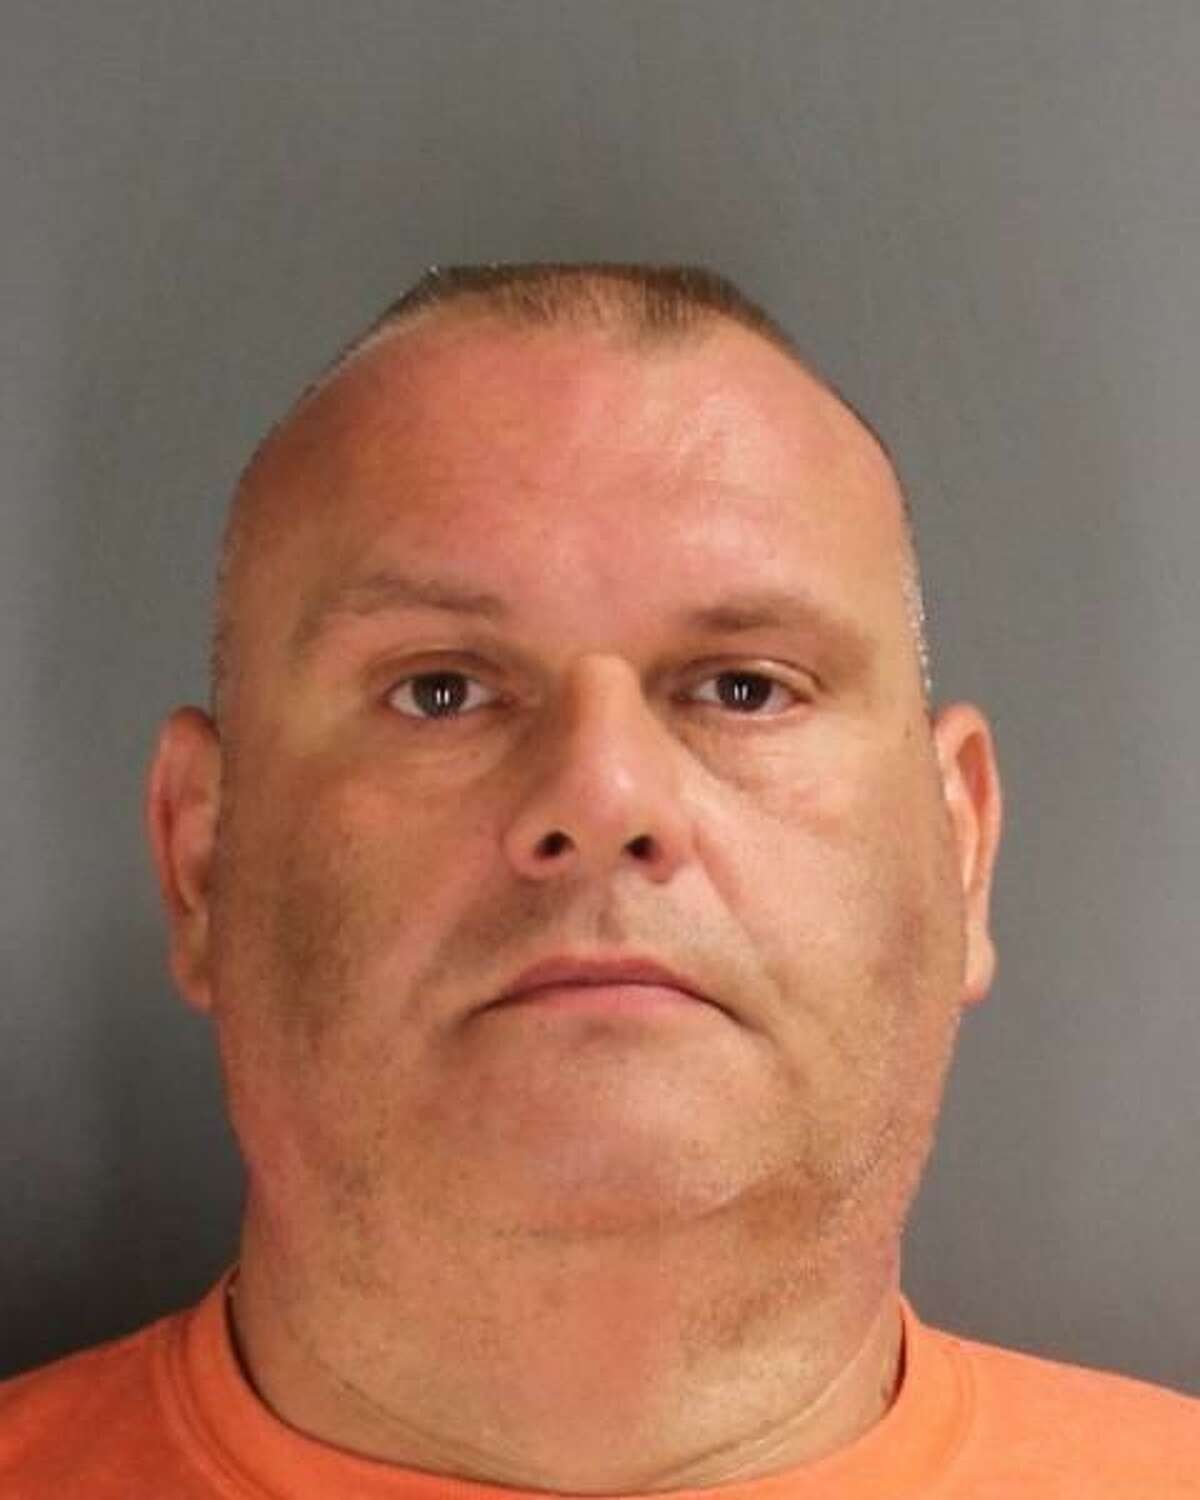 Rensselaer County jail guard Sean Morrissey was arrested on Sept. 26, 2018 for allegedly sexually abusing a female inmate. He was arraigned on June 29, 2022 and will be facing a trial.